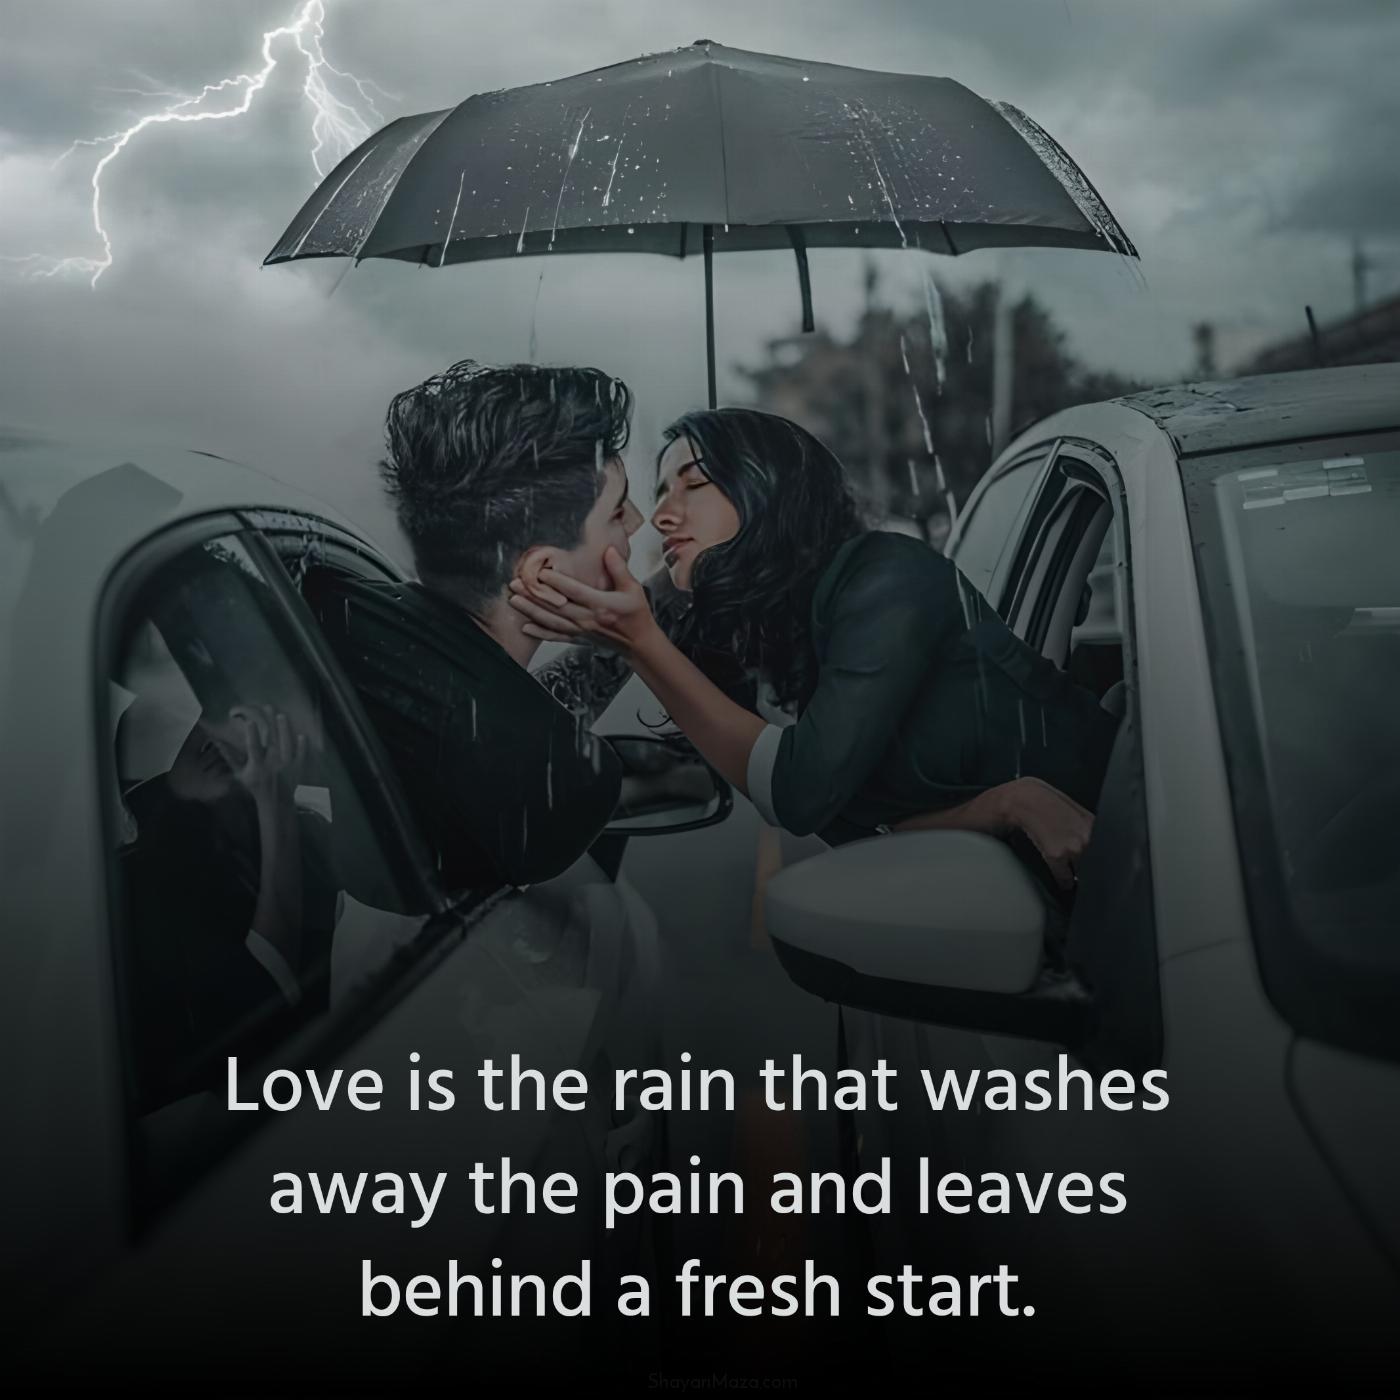 Love is the rain that washes away the pain and leaves behind